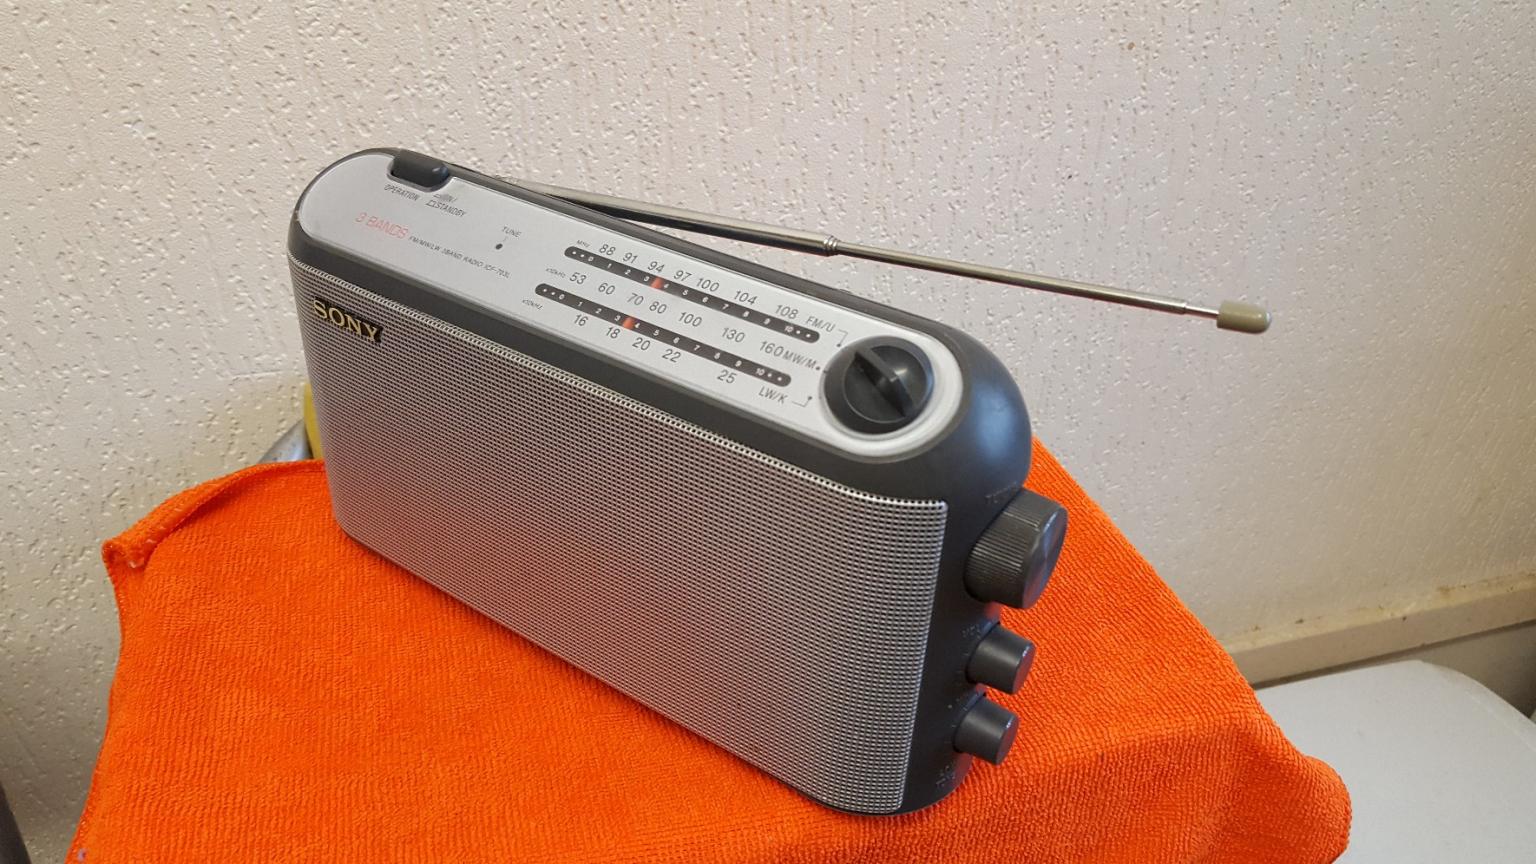 Sony icf-703l three band portable radio in M12 Manchester for £20.00 ...